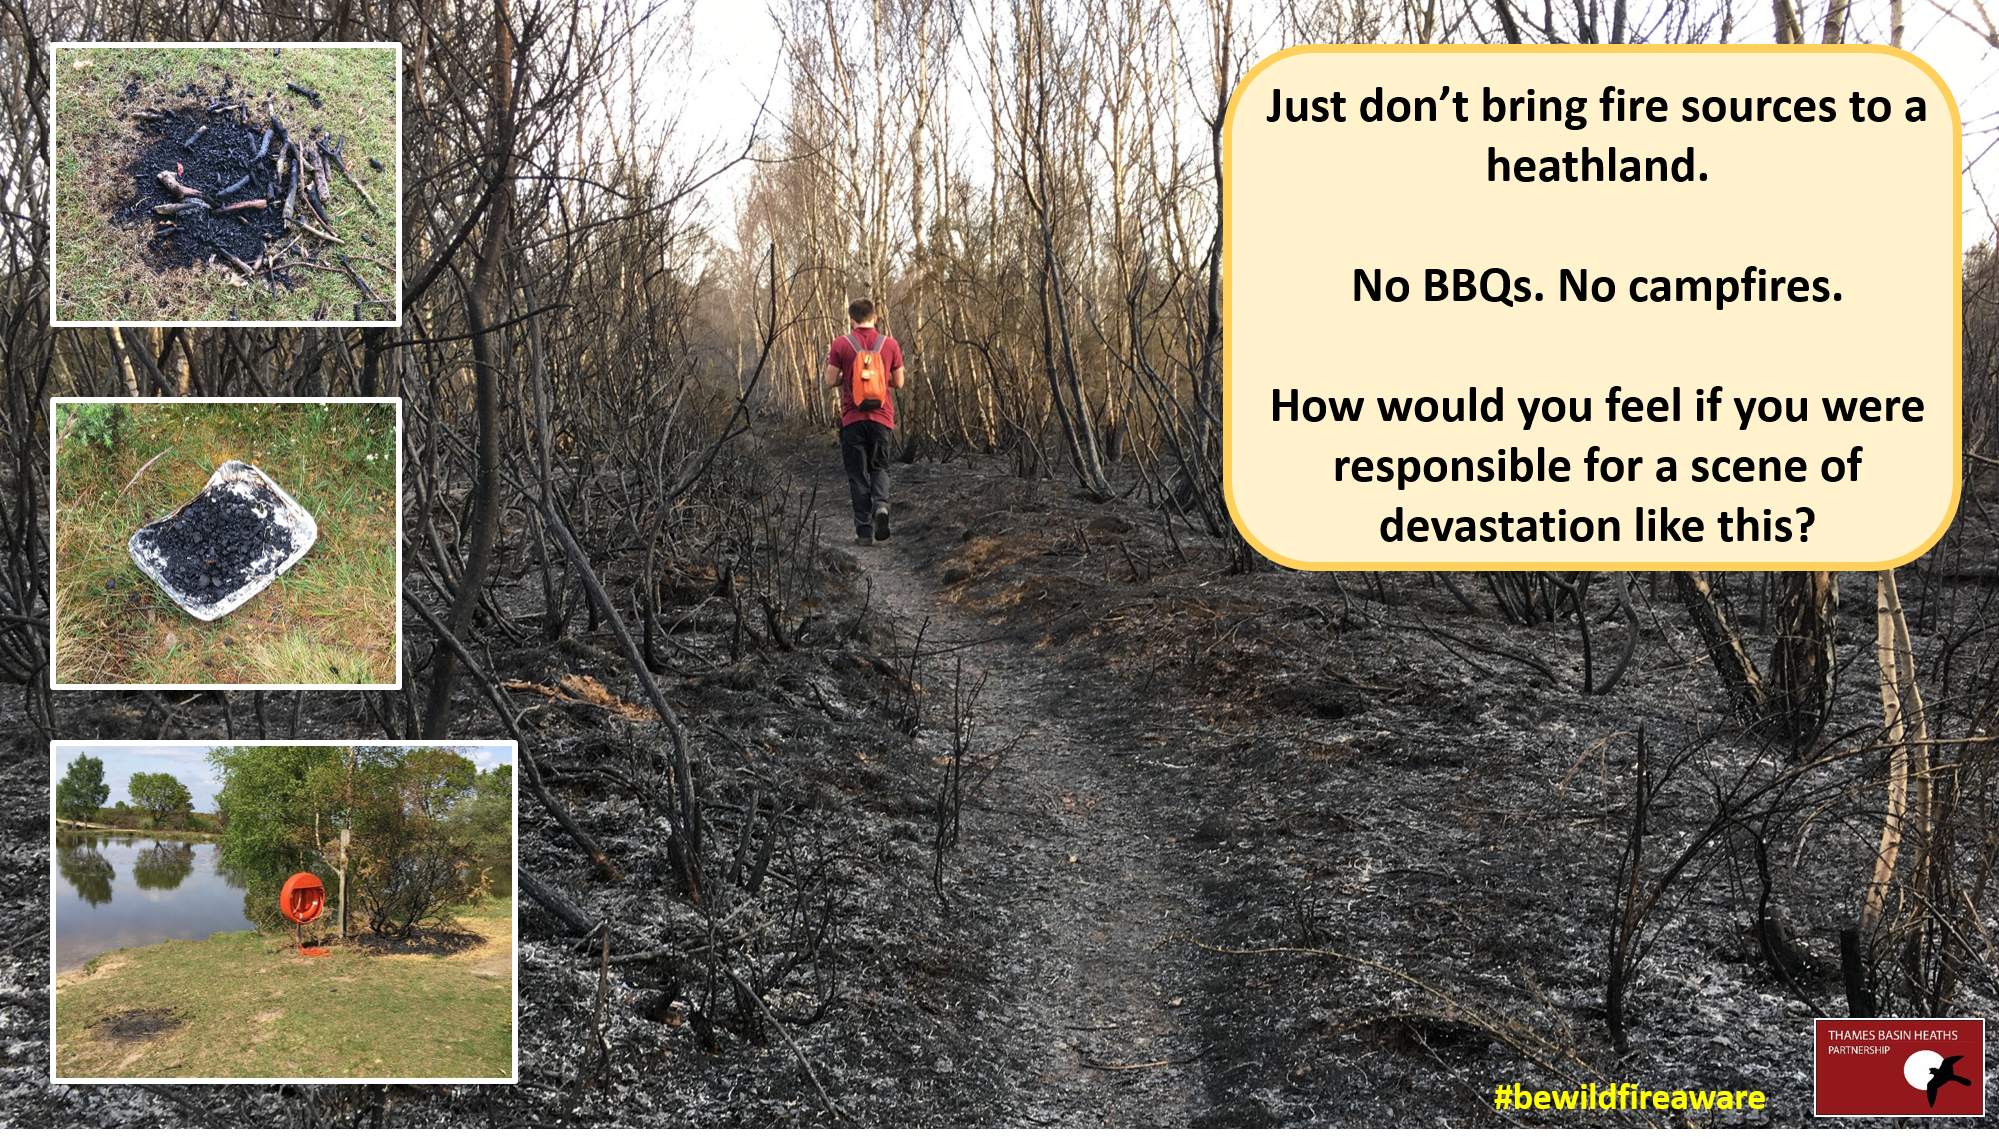 Wildfires are usually caused by carelessness - Don't bring fires to the heath